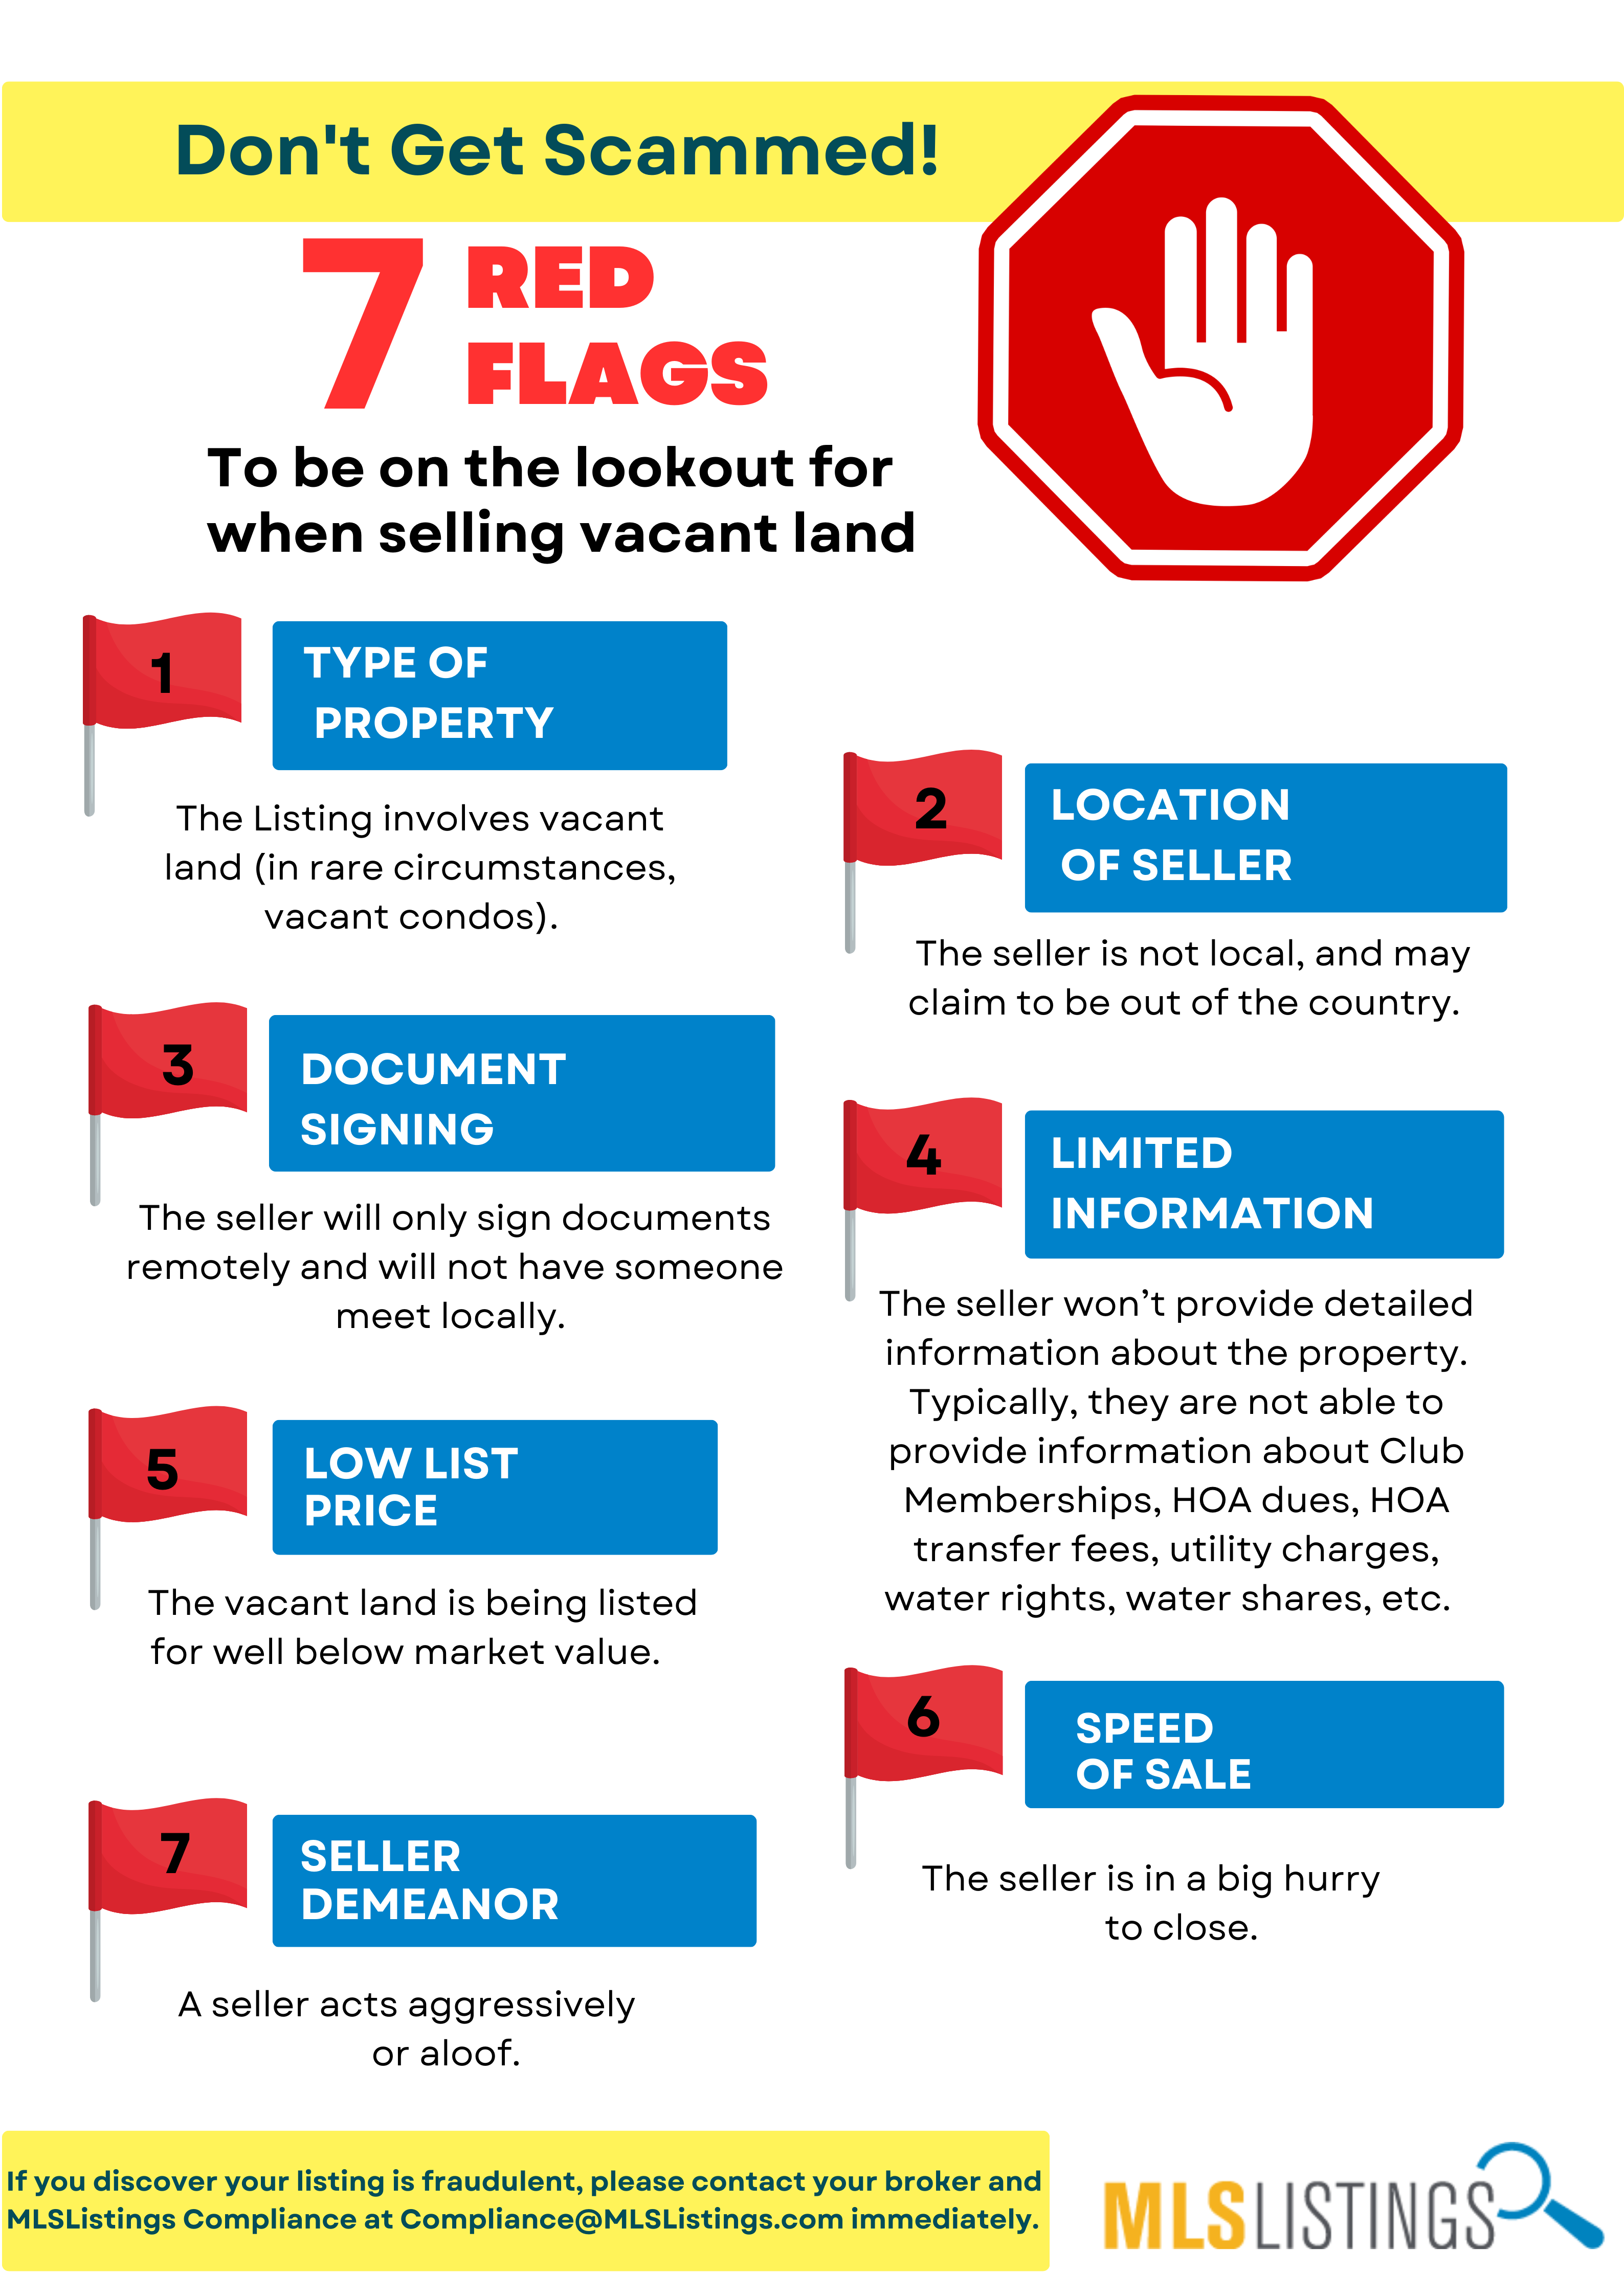 7 Red Flags to Lookout for When Selling Vacant Land (San Mateo County  Association of REALTORS®)